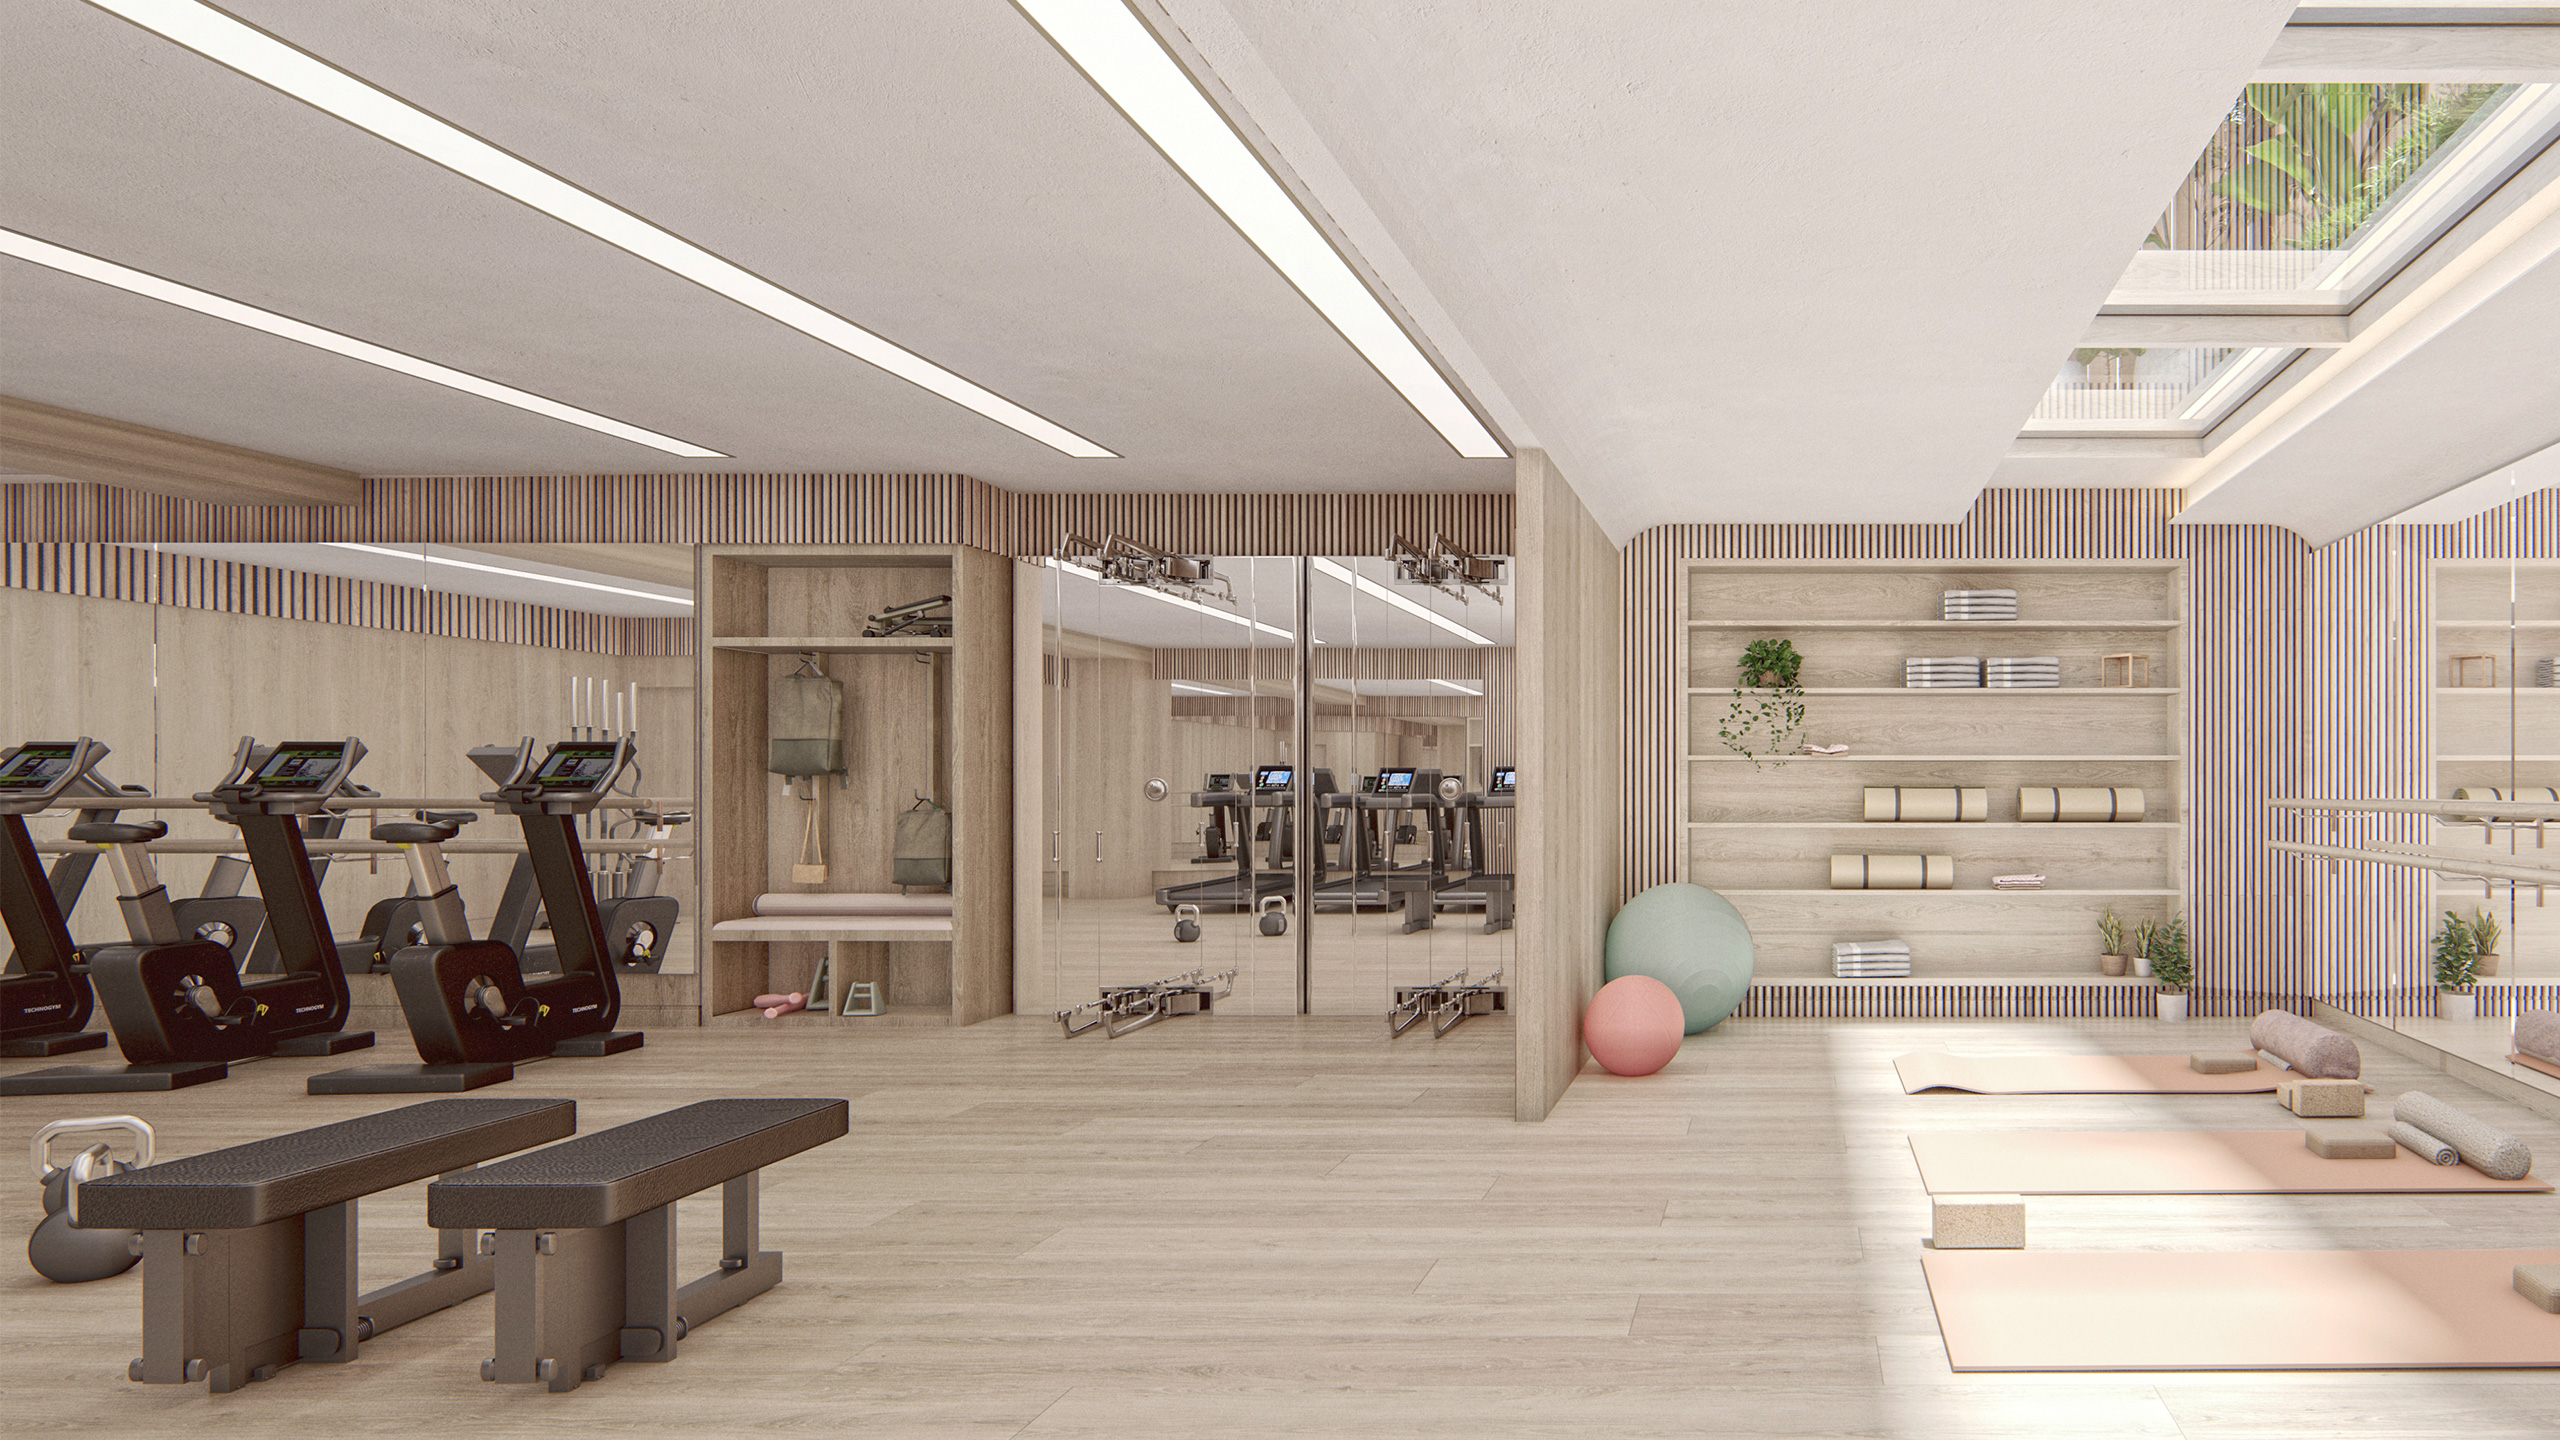 Fitness center at Hendrix House condominiums in Kips Bay, featuring exercise equipment and modern amenities.